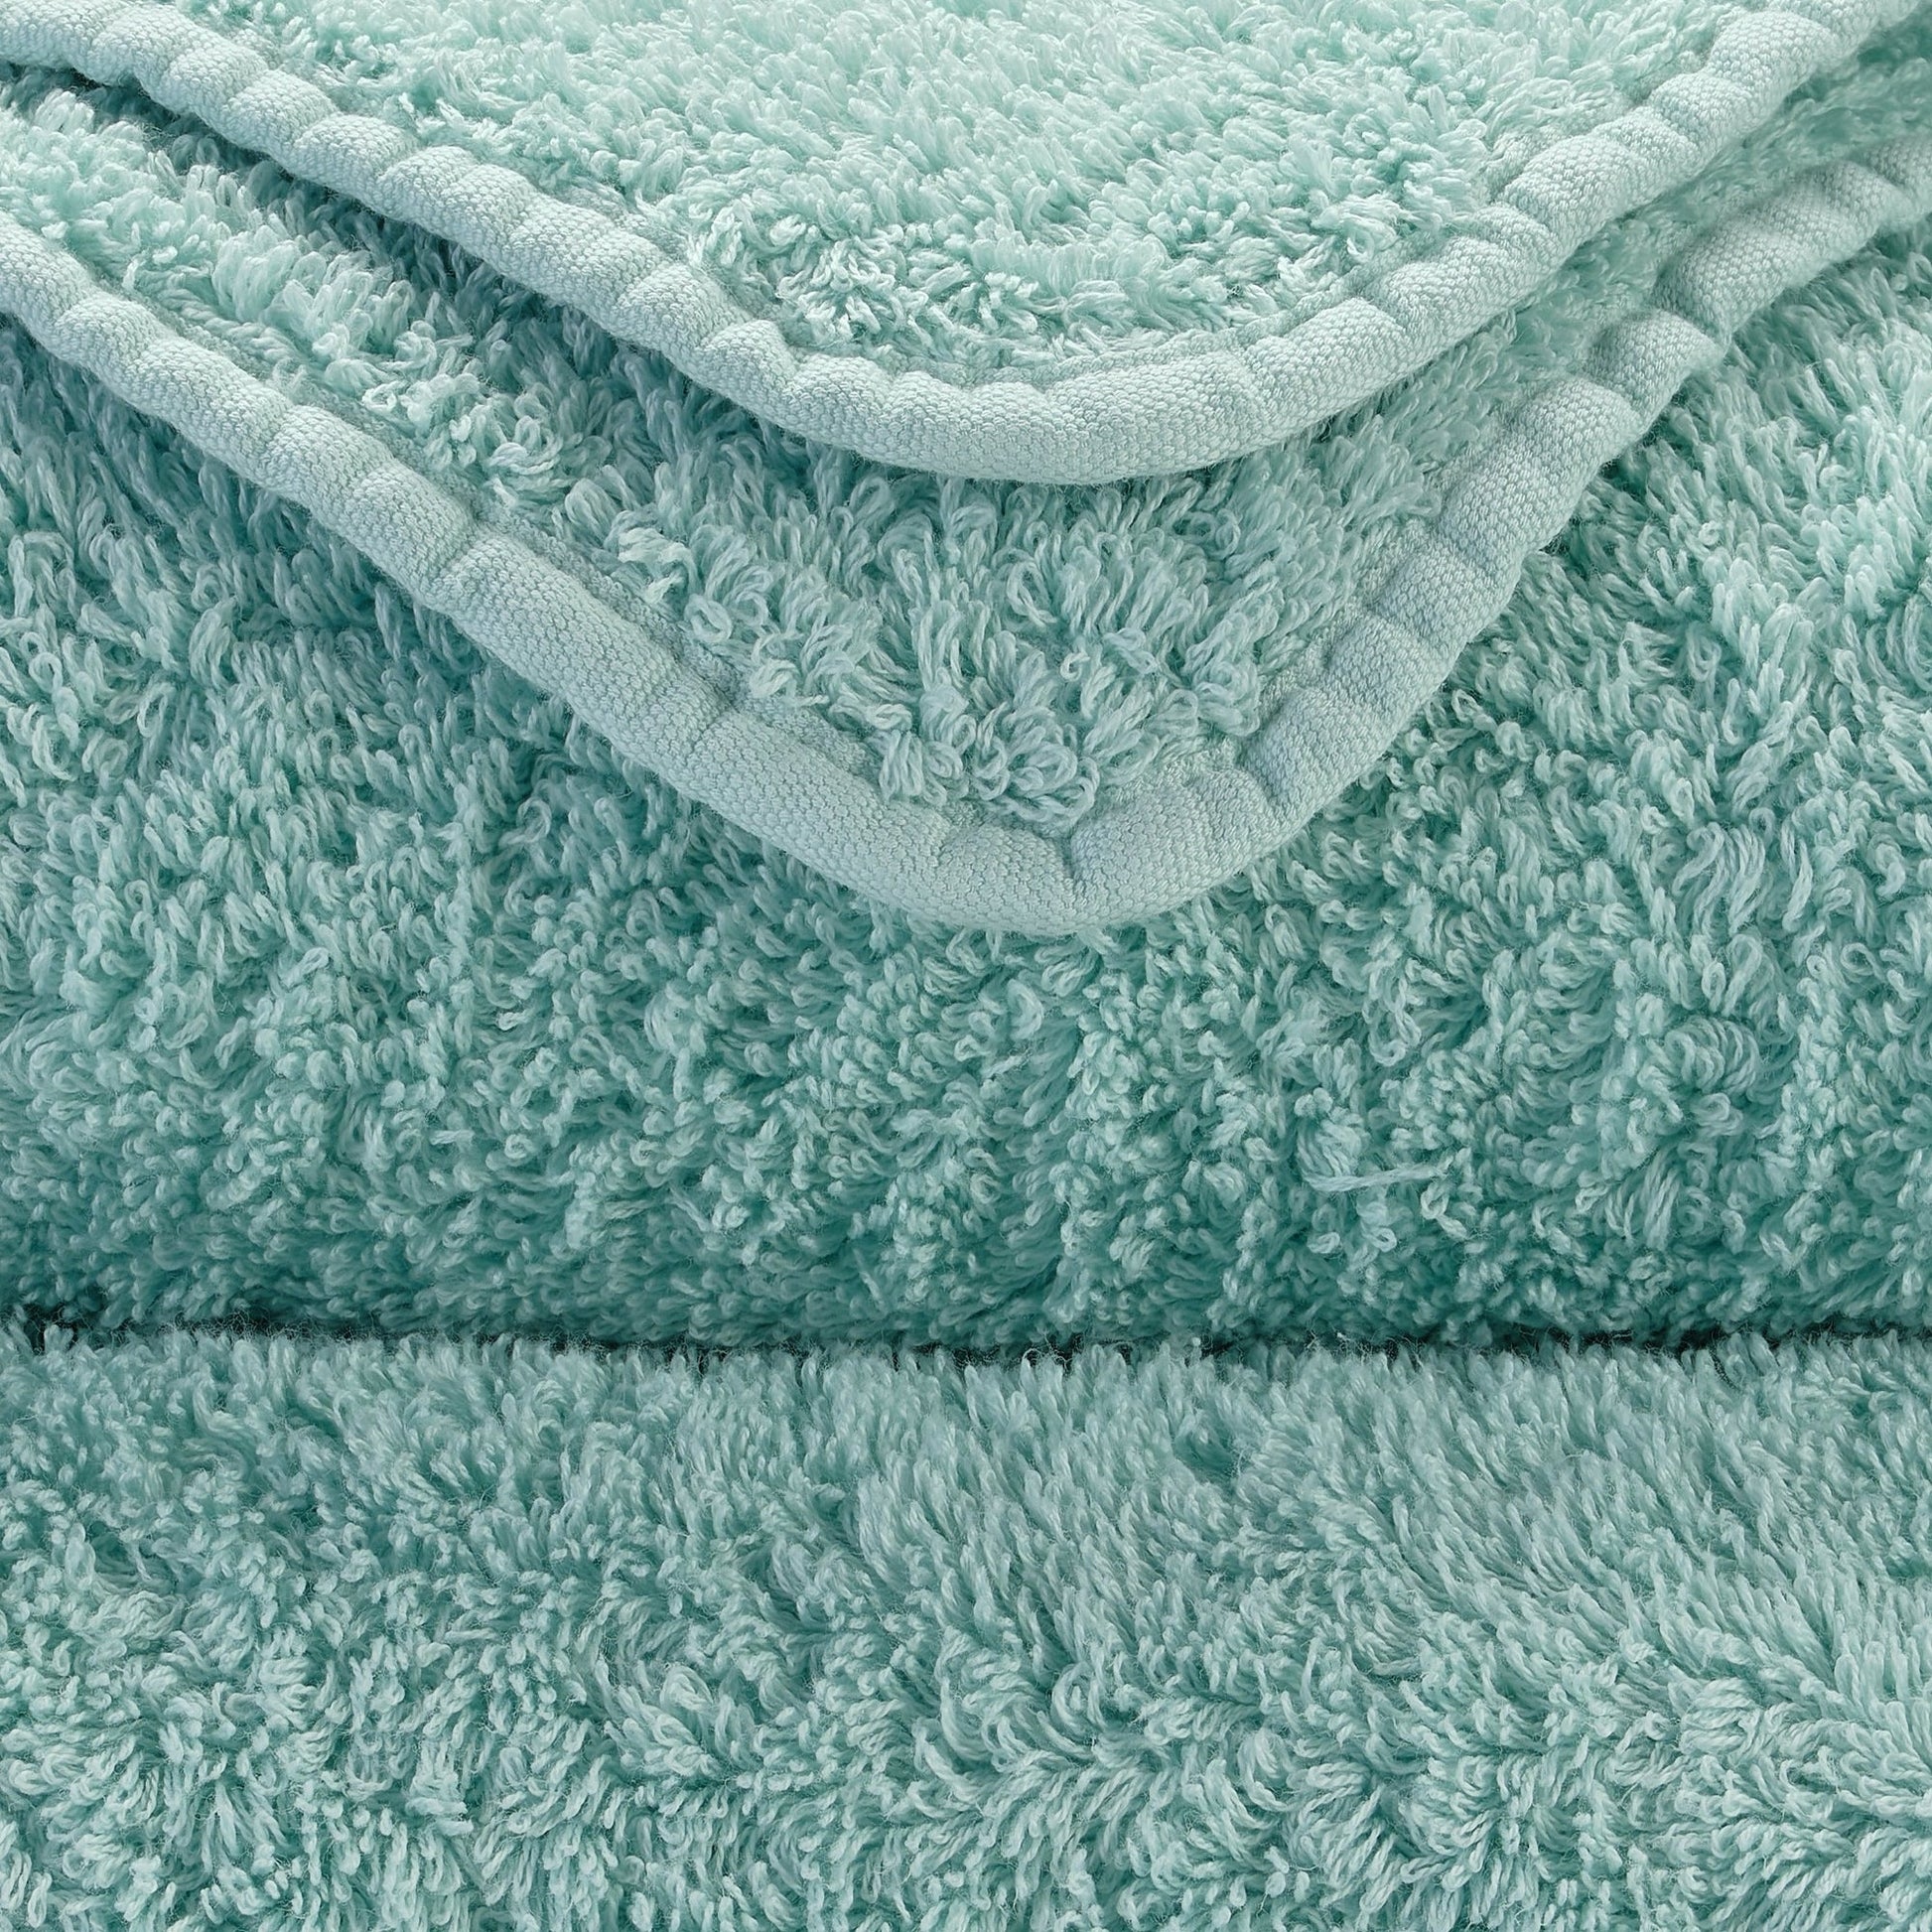 Bright Teal Blue Egyptian Cotton Towel